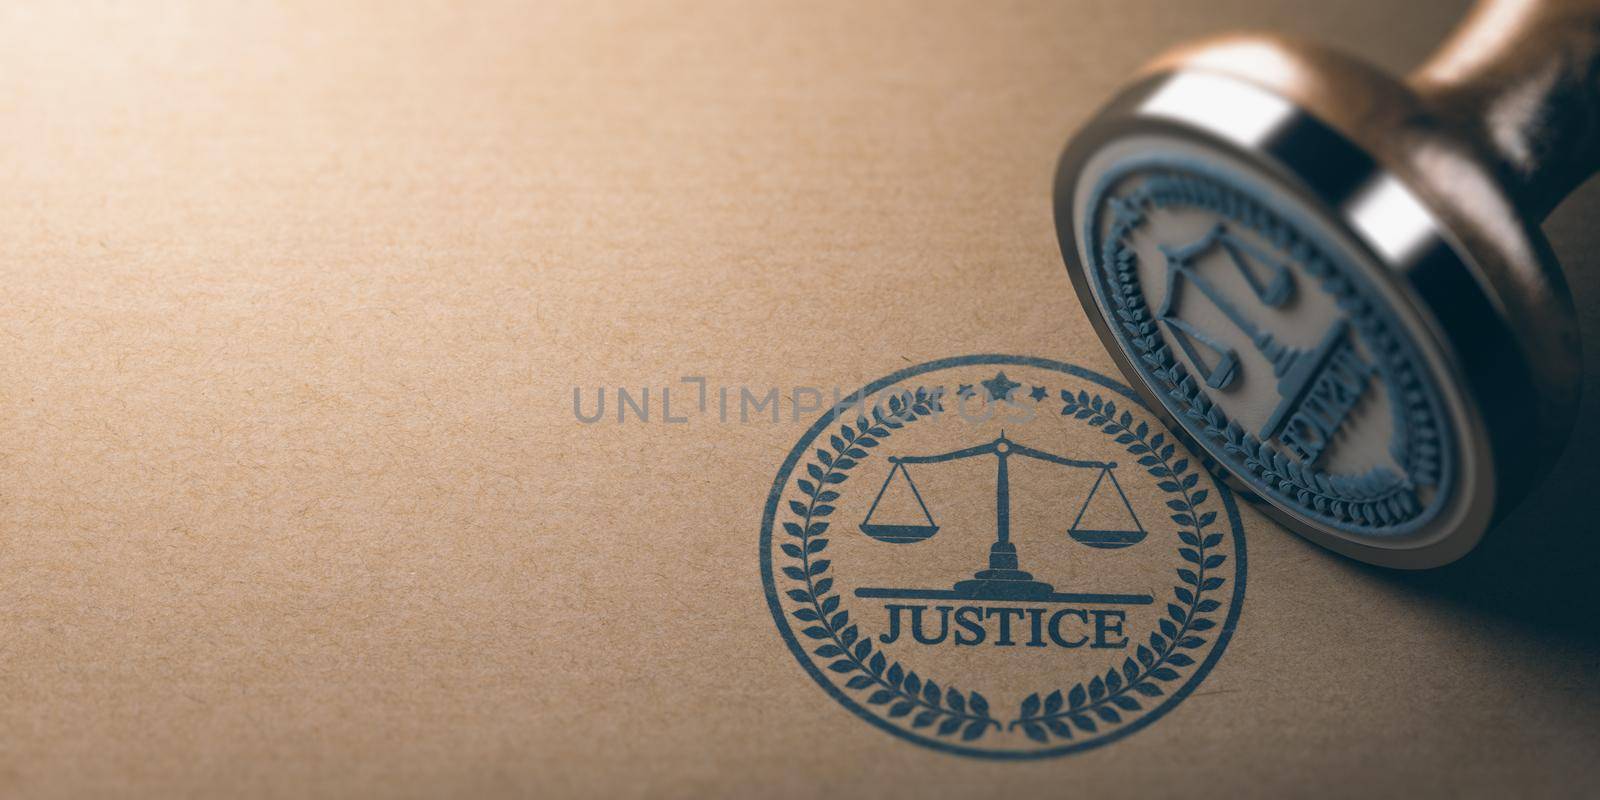 Scales of justice Stamp by Olivier-Le-Moal